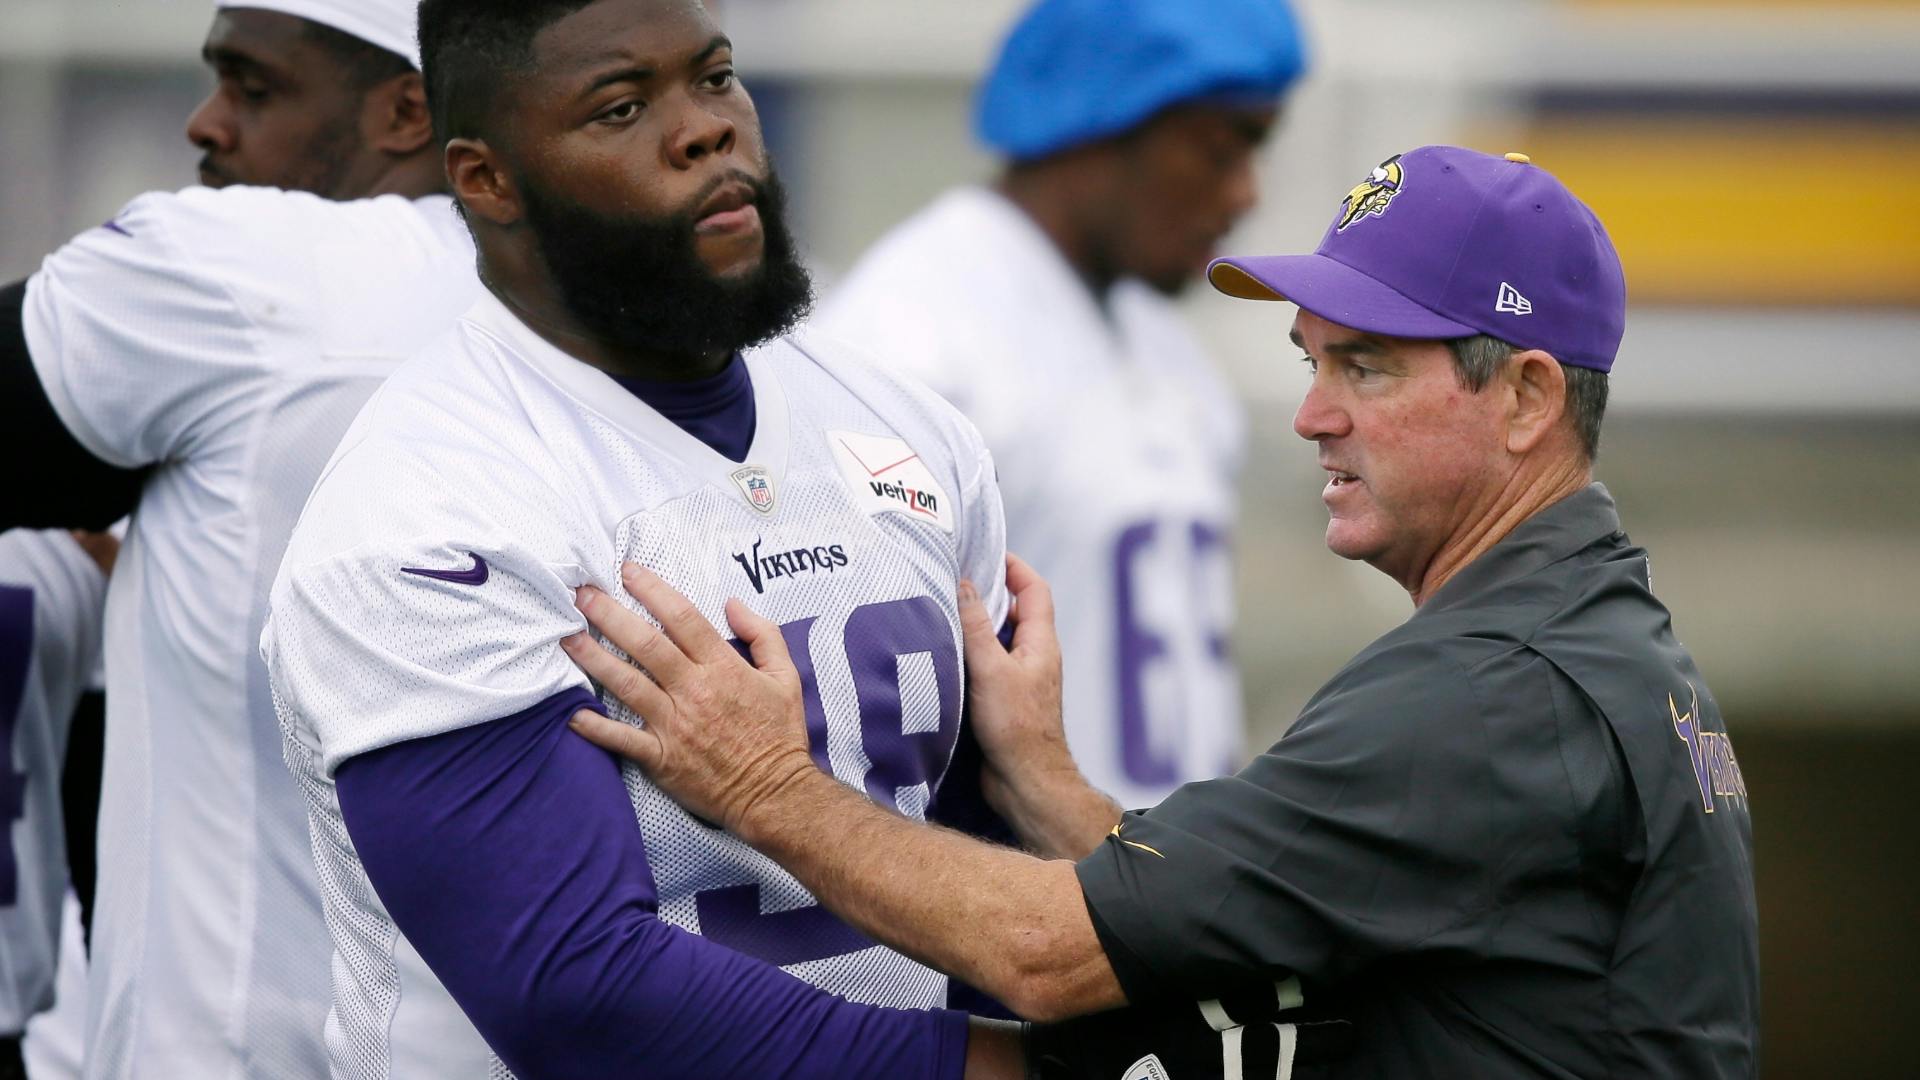 Vikings general manager Rick Spielman and head coach Mike Zimmer address the media after defensive lineman was shot in a crowded Minneapolis nightclub.